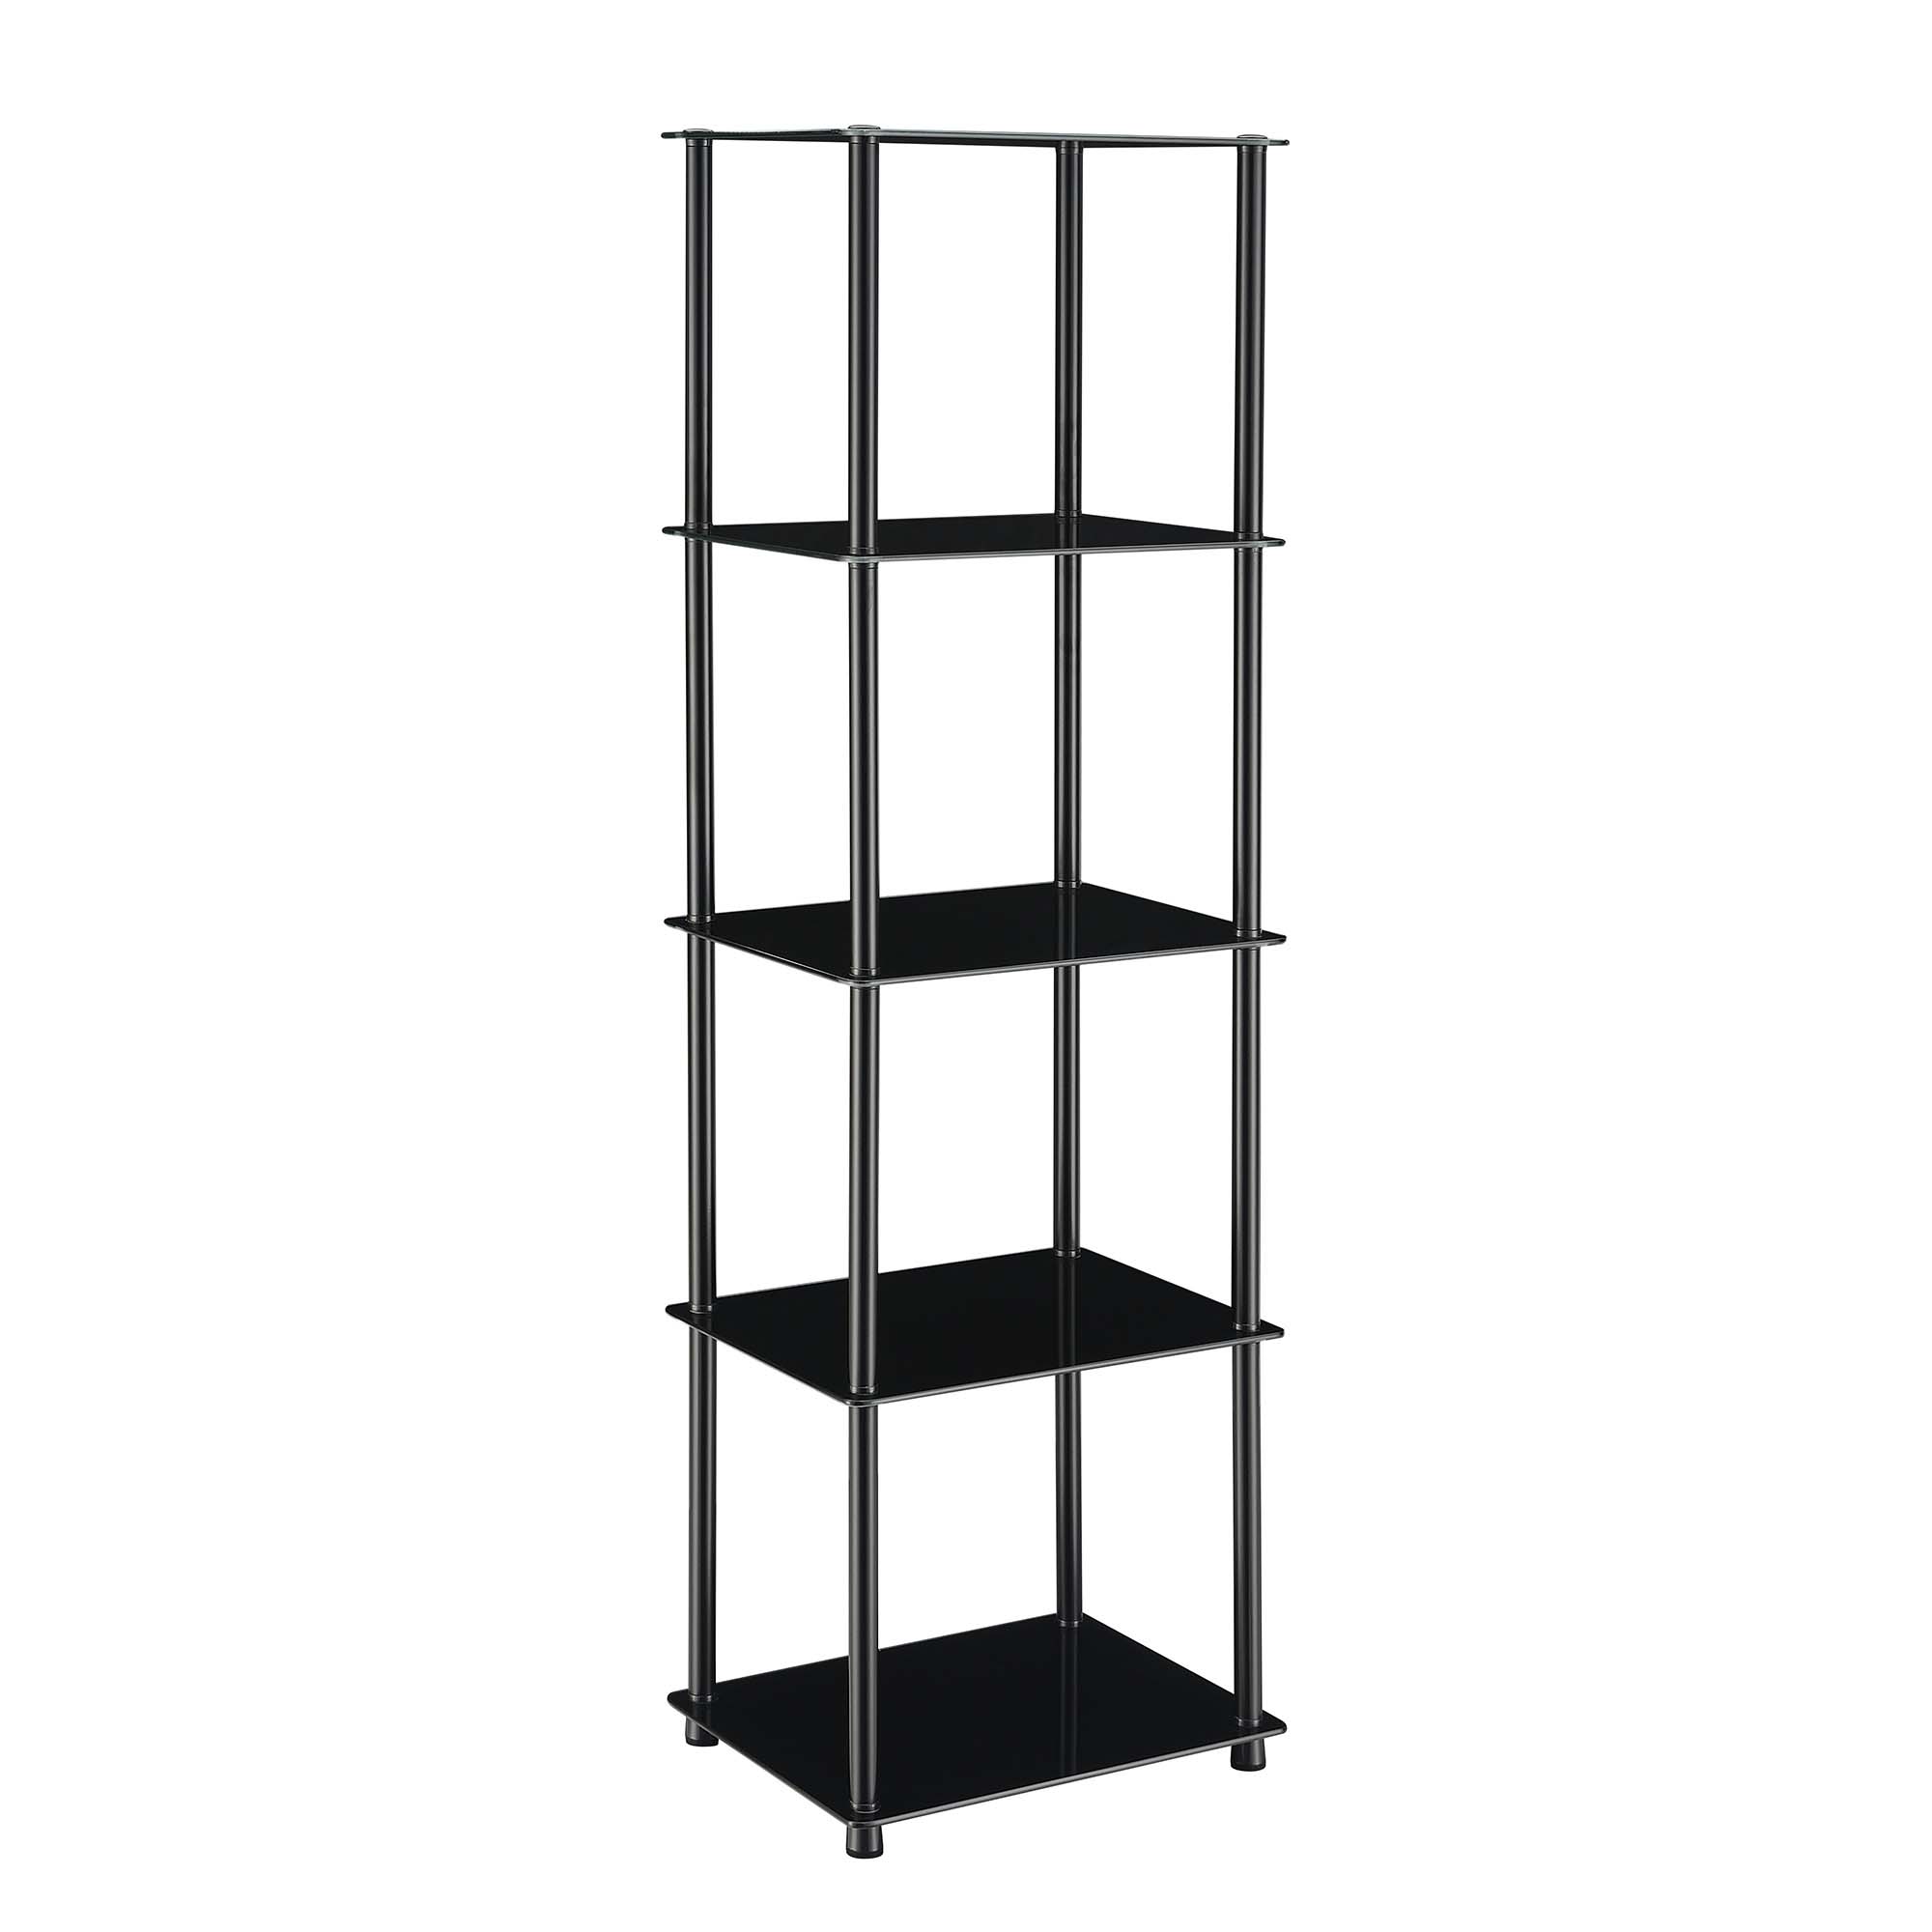 Convenience Concepts Designs2Go Classic Glass 5 Tier Tower, Black Glass - image 3 of 3